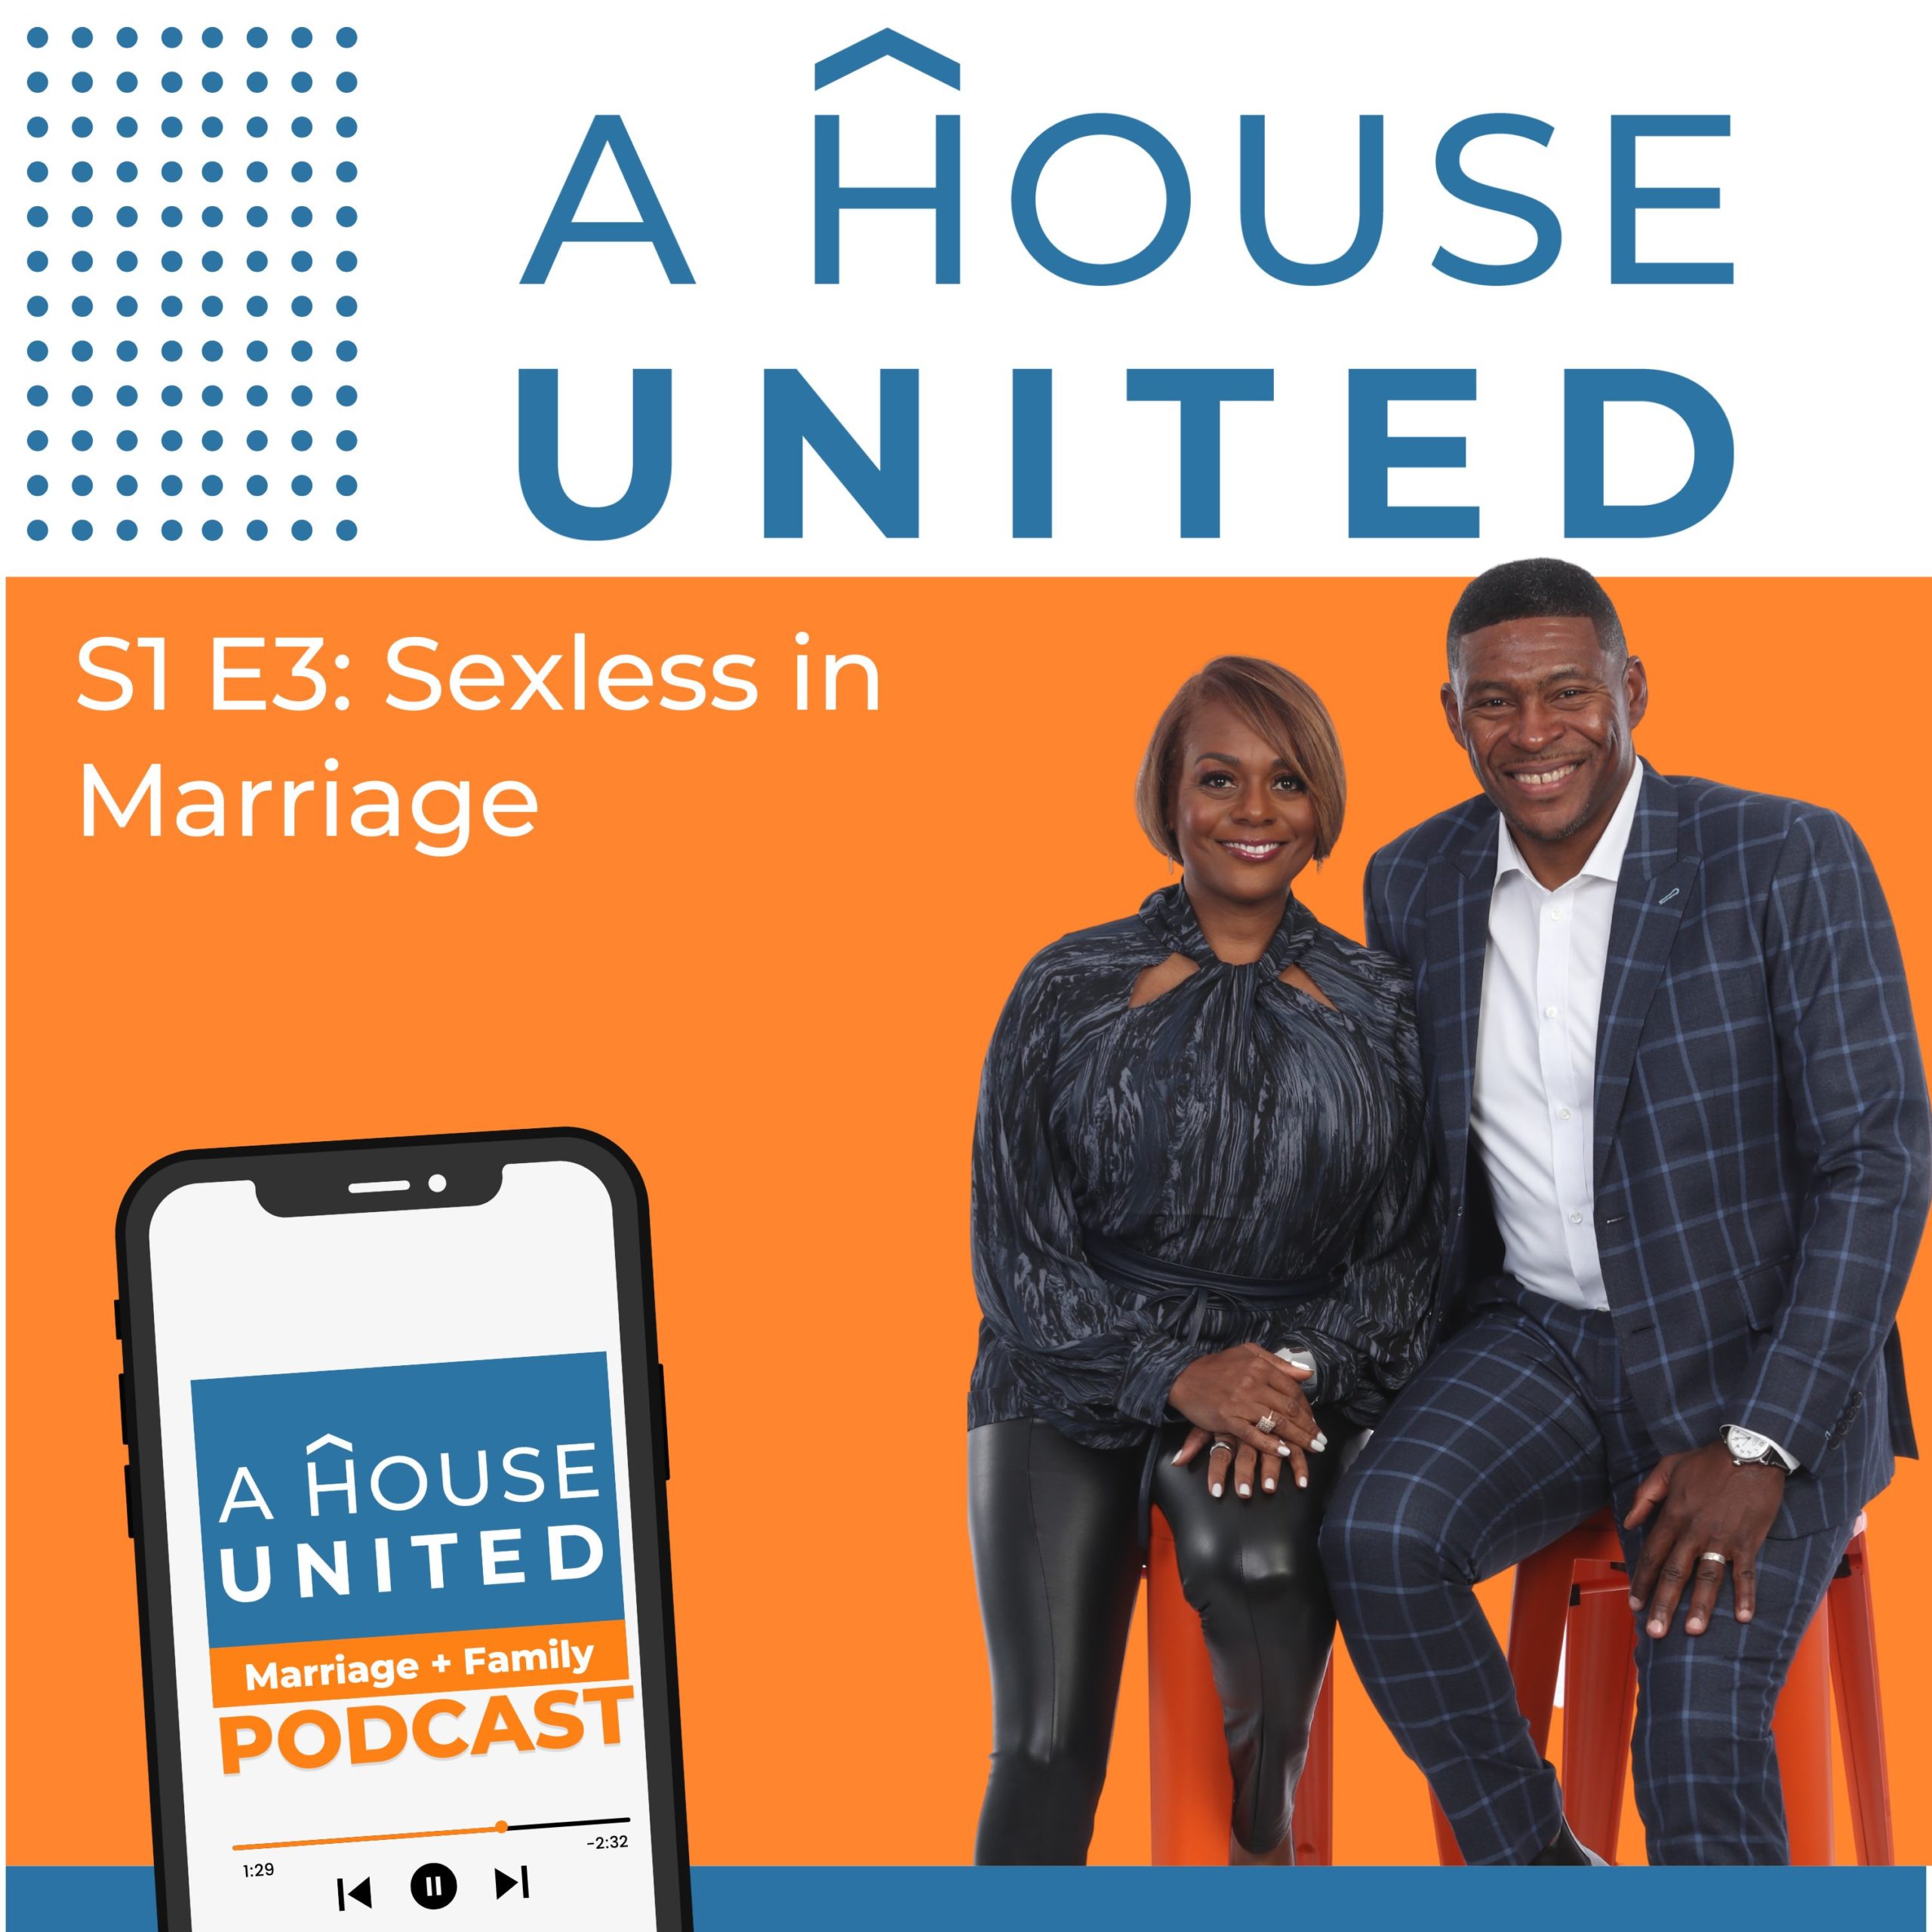 A House United S1E3 Sexless in Marriage